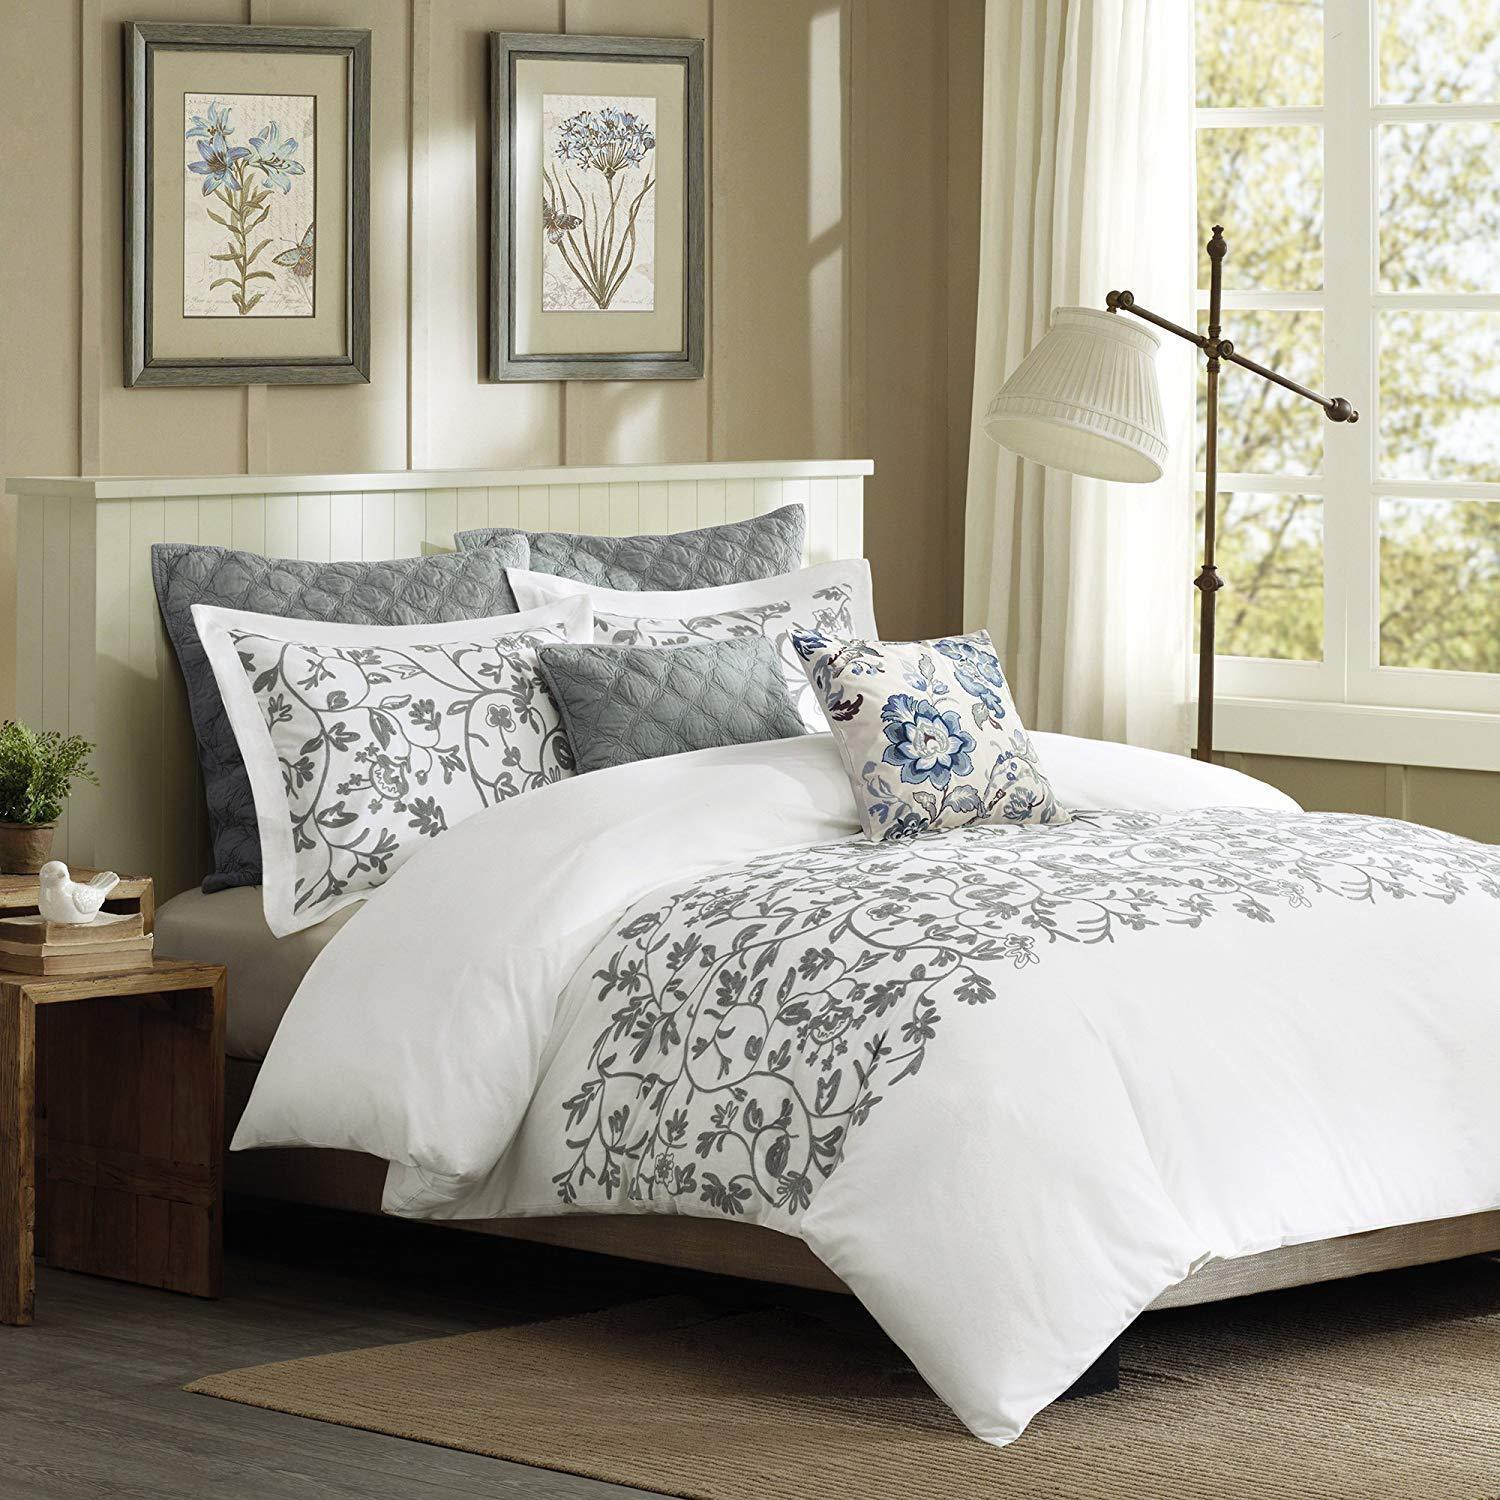 New Harbor House Luciana Duvet Cover Turtle Dove Variety Sizes - $83.30 - $101.81